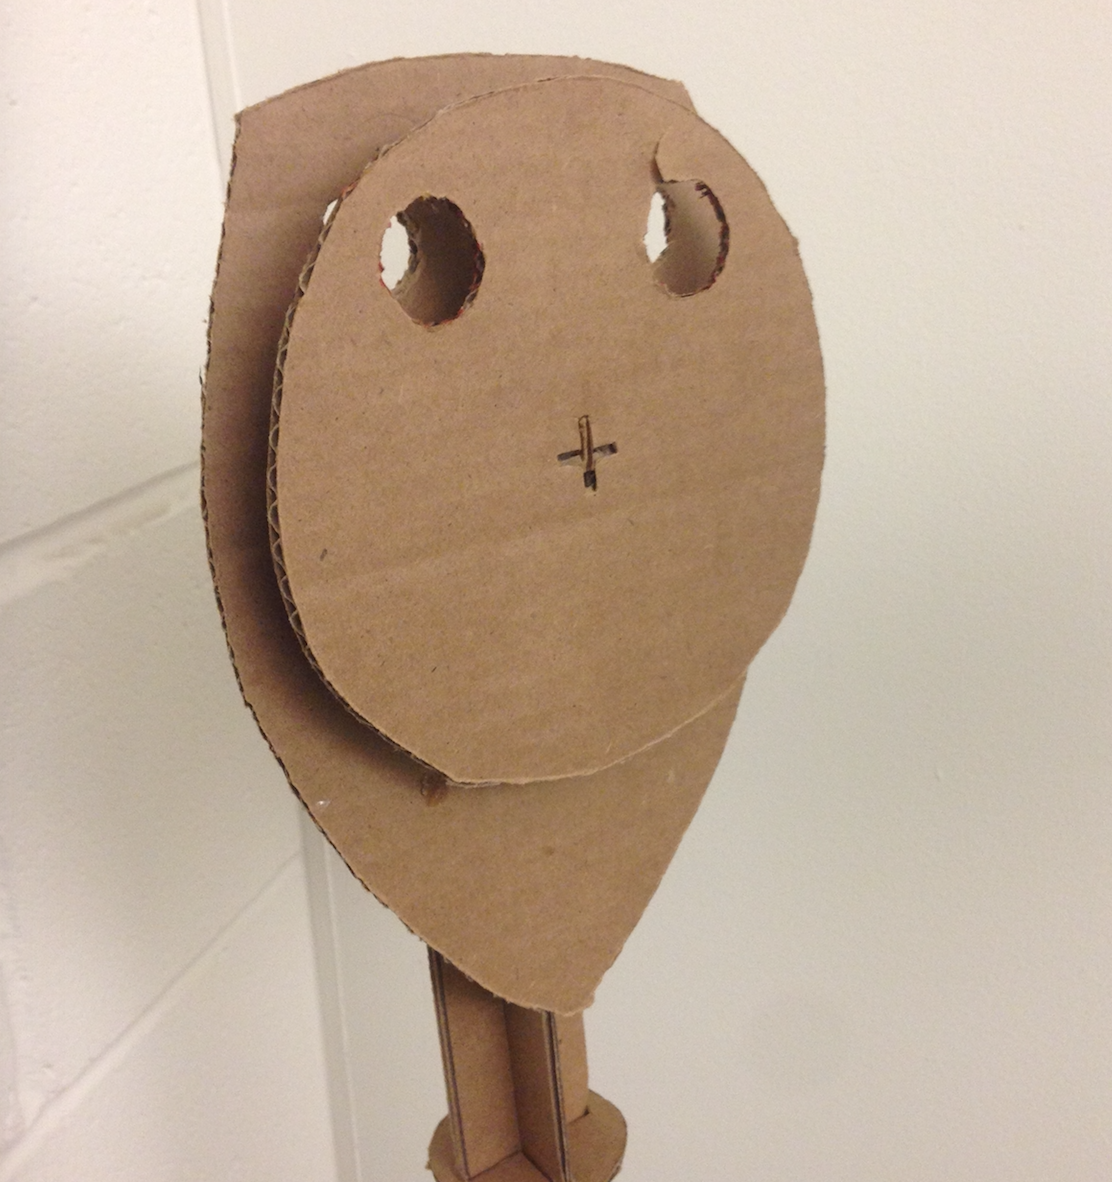 Initial mock-ups of the ObservaStory were made using cardboard.